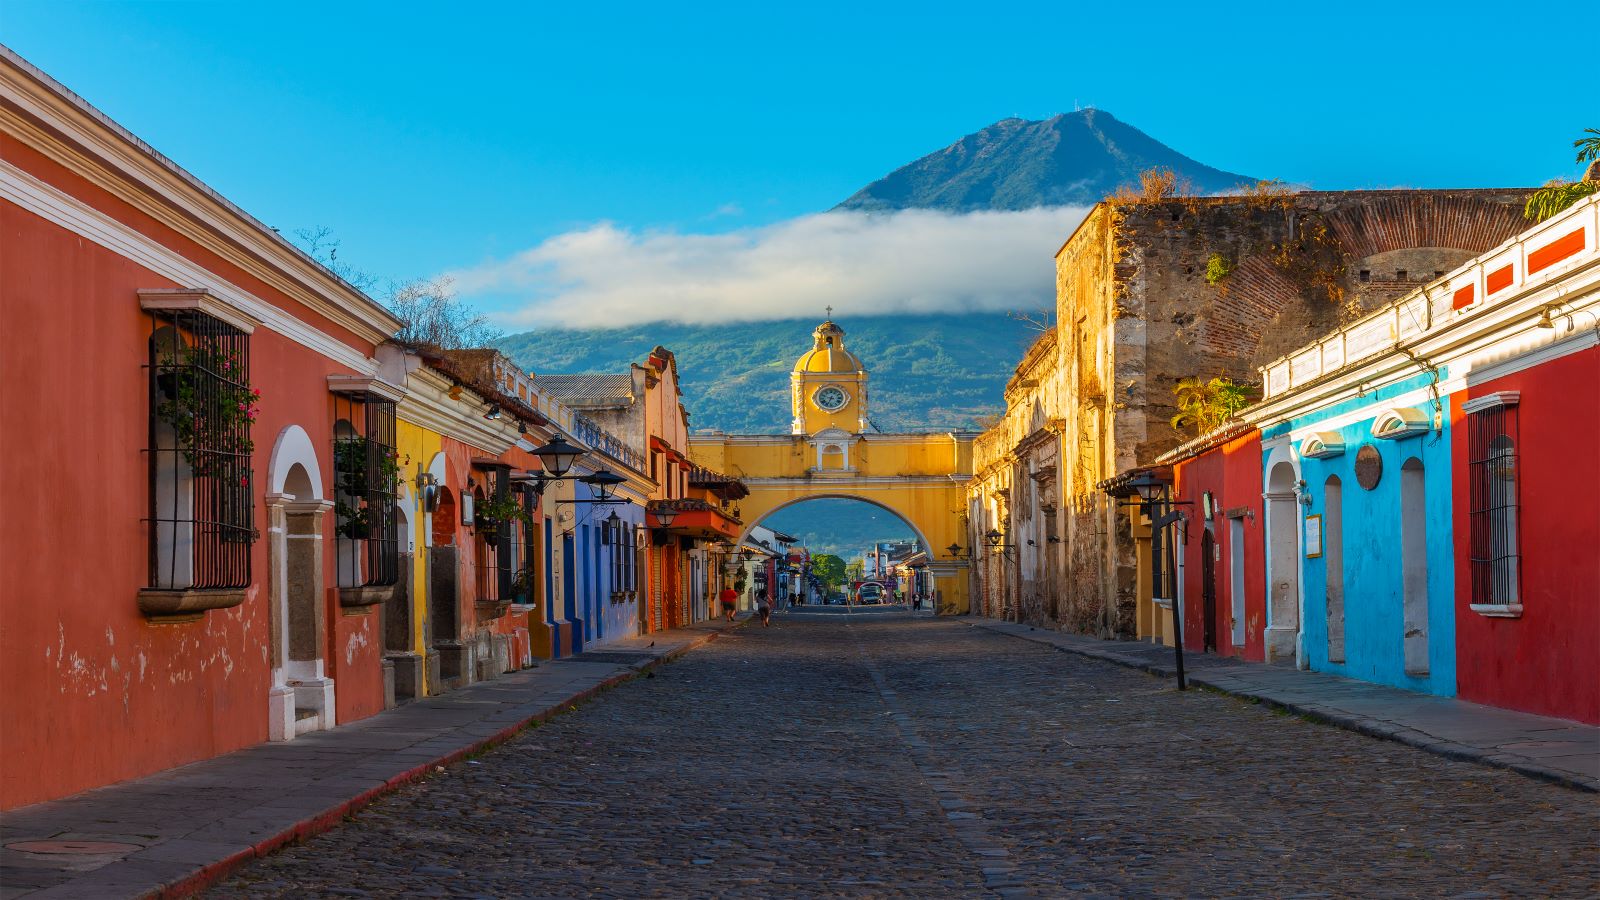 Cityscape of the main street and yellow Santa Catalina arch in the historic city center of Antigua at sunrise with the Agua volcano, Guatemala.